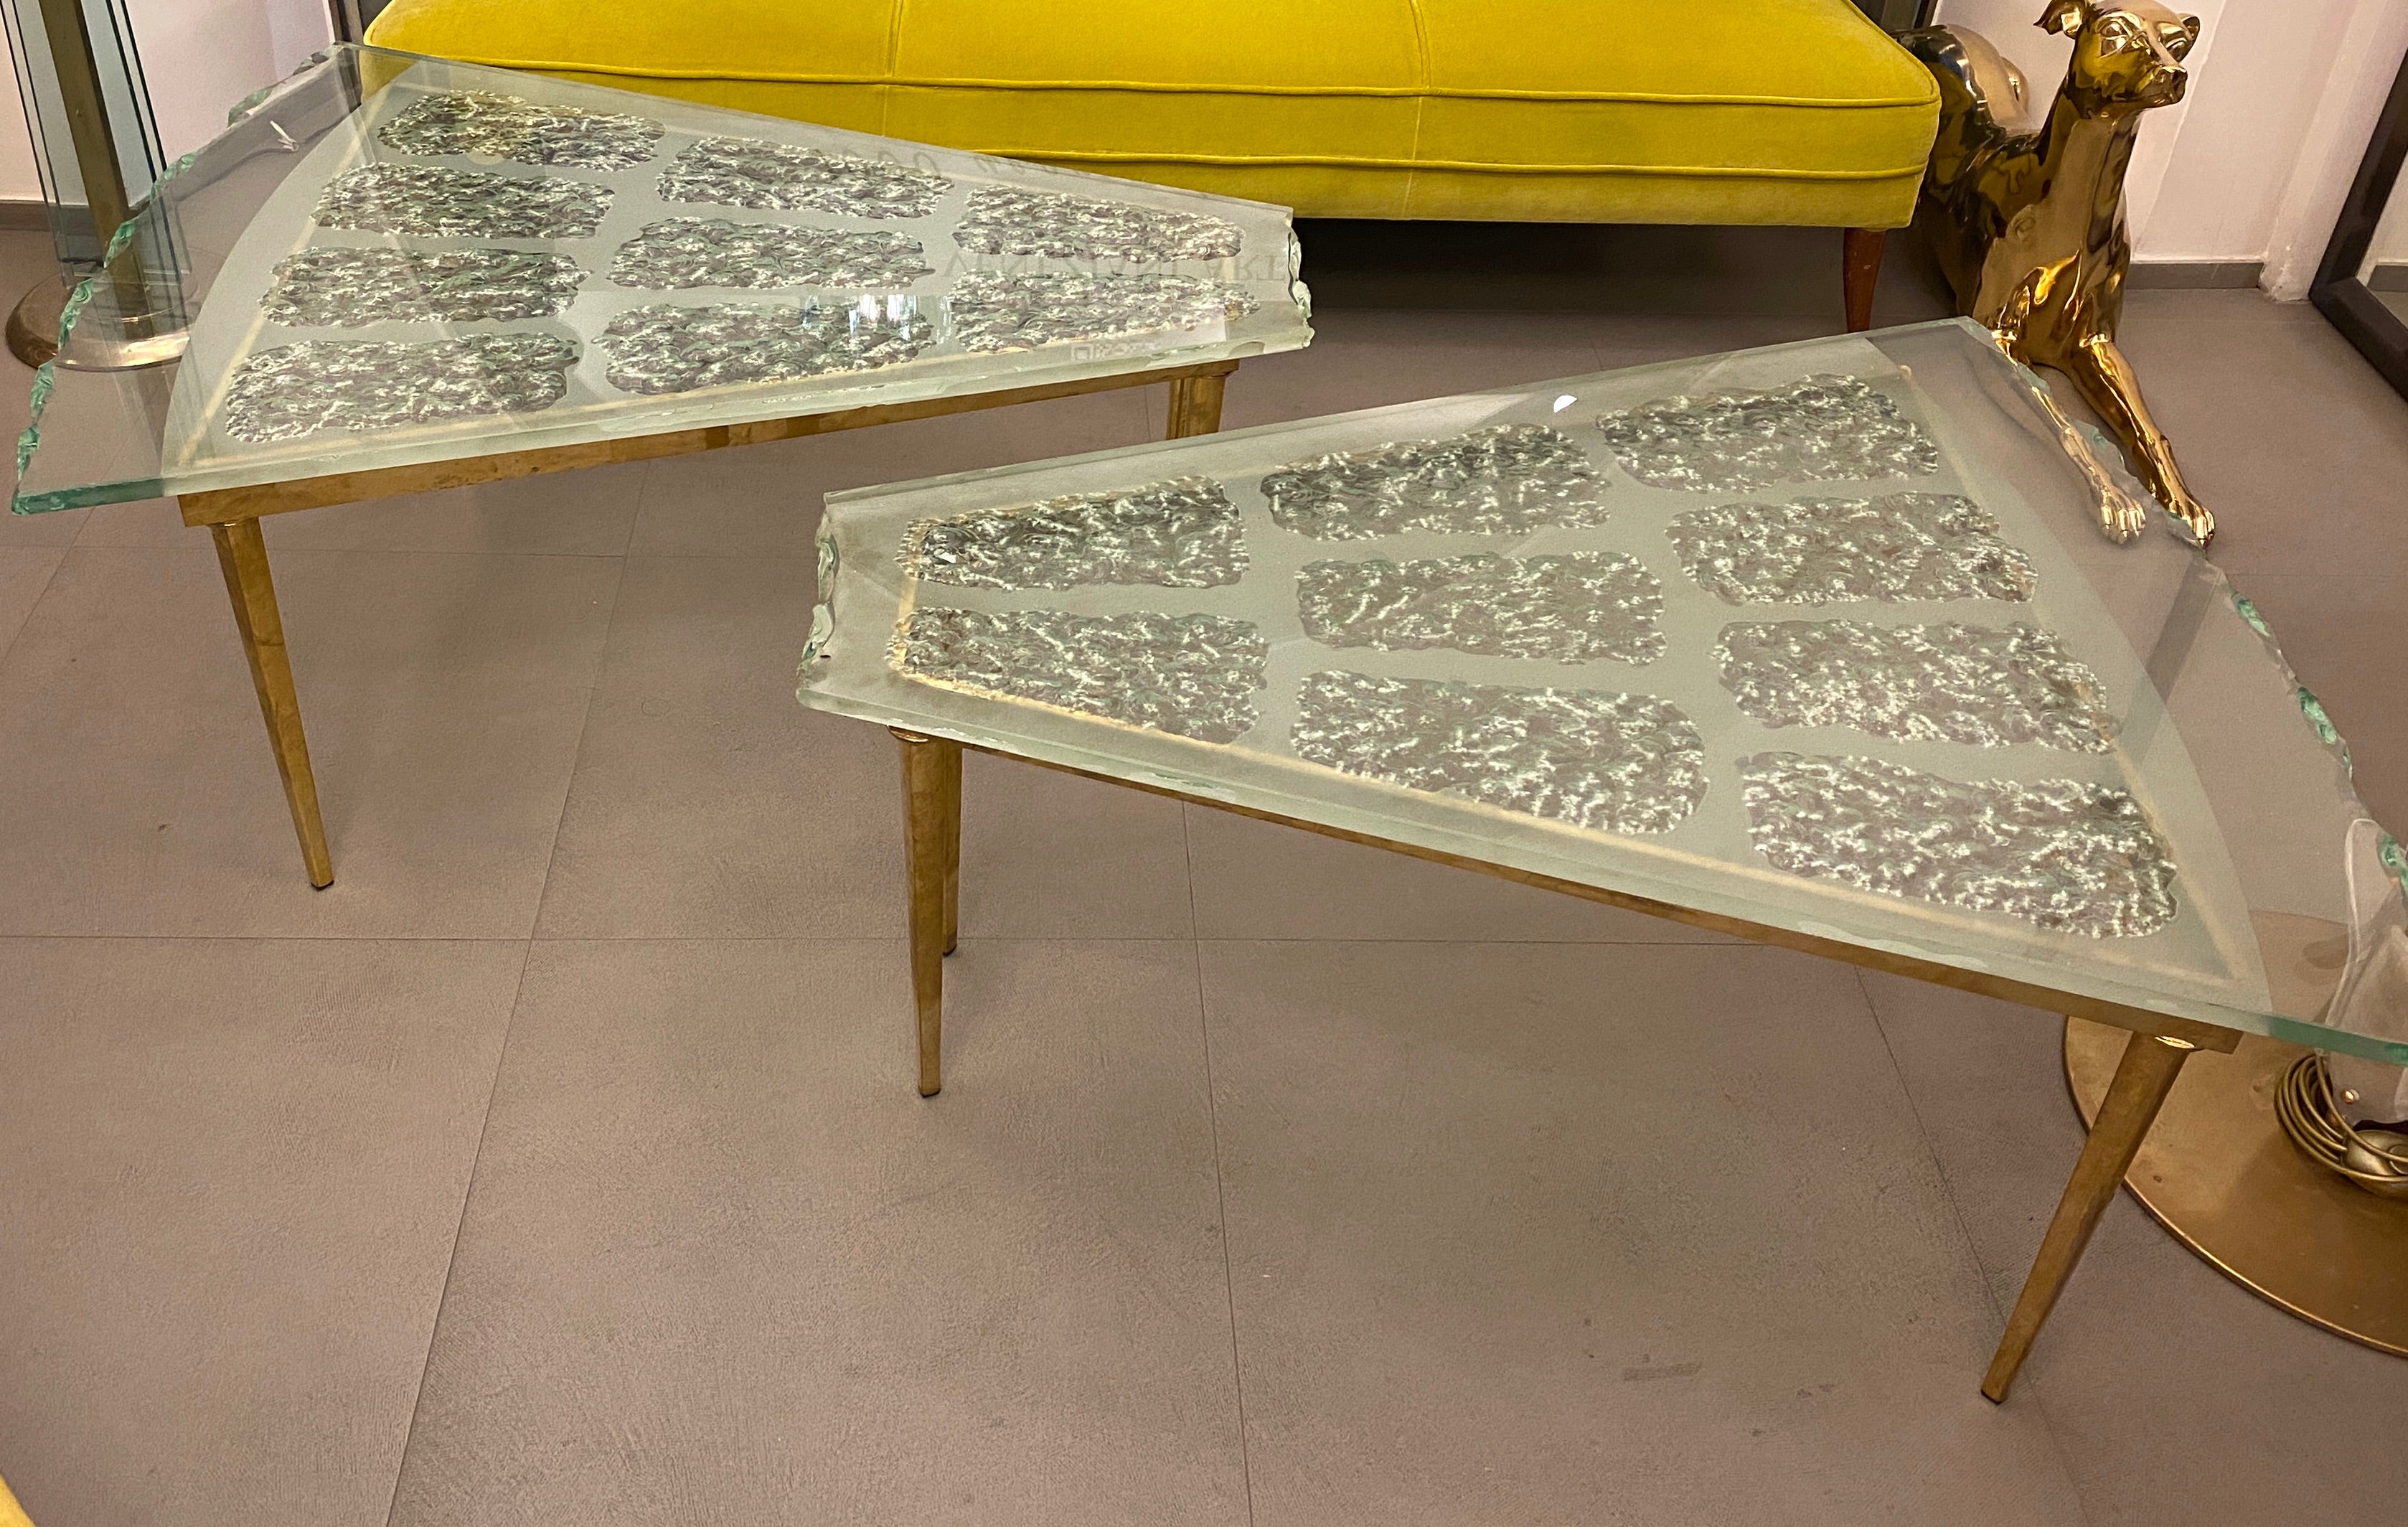 A Pair of   Rare Extraordinary  Mid-Century modern  Italian sofa table made of hand blown beveled and frosted Murano glass, designed by Max Ingrand and produced by Fontana Arte.   The detailed etched coffee table is supported by a brass frame,